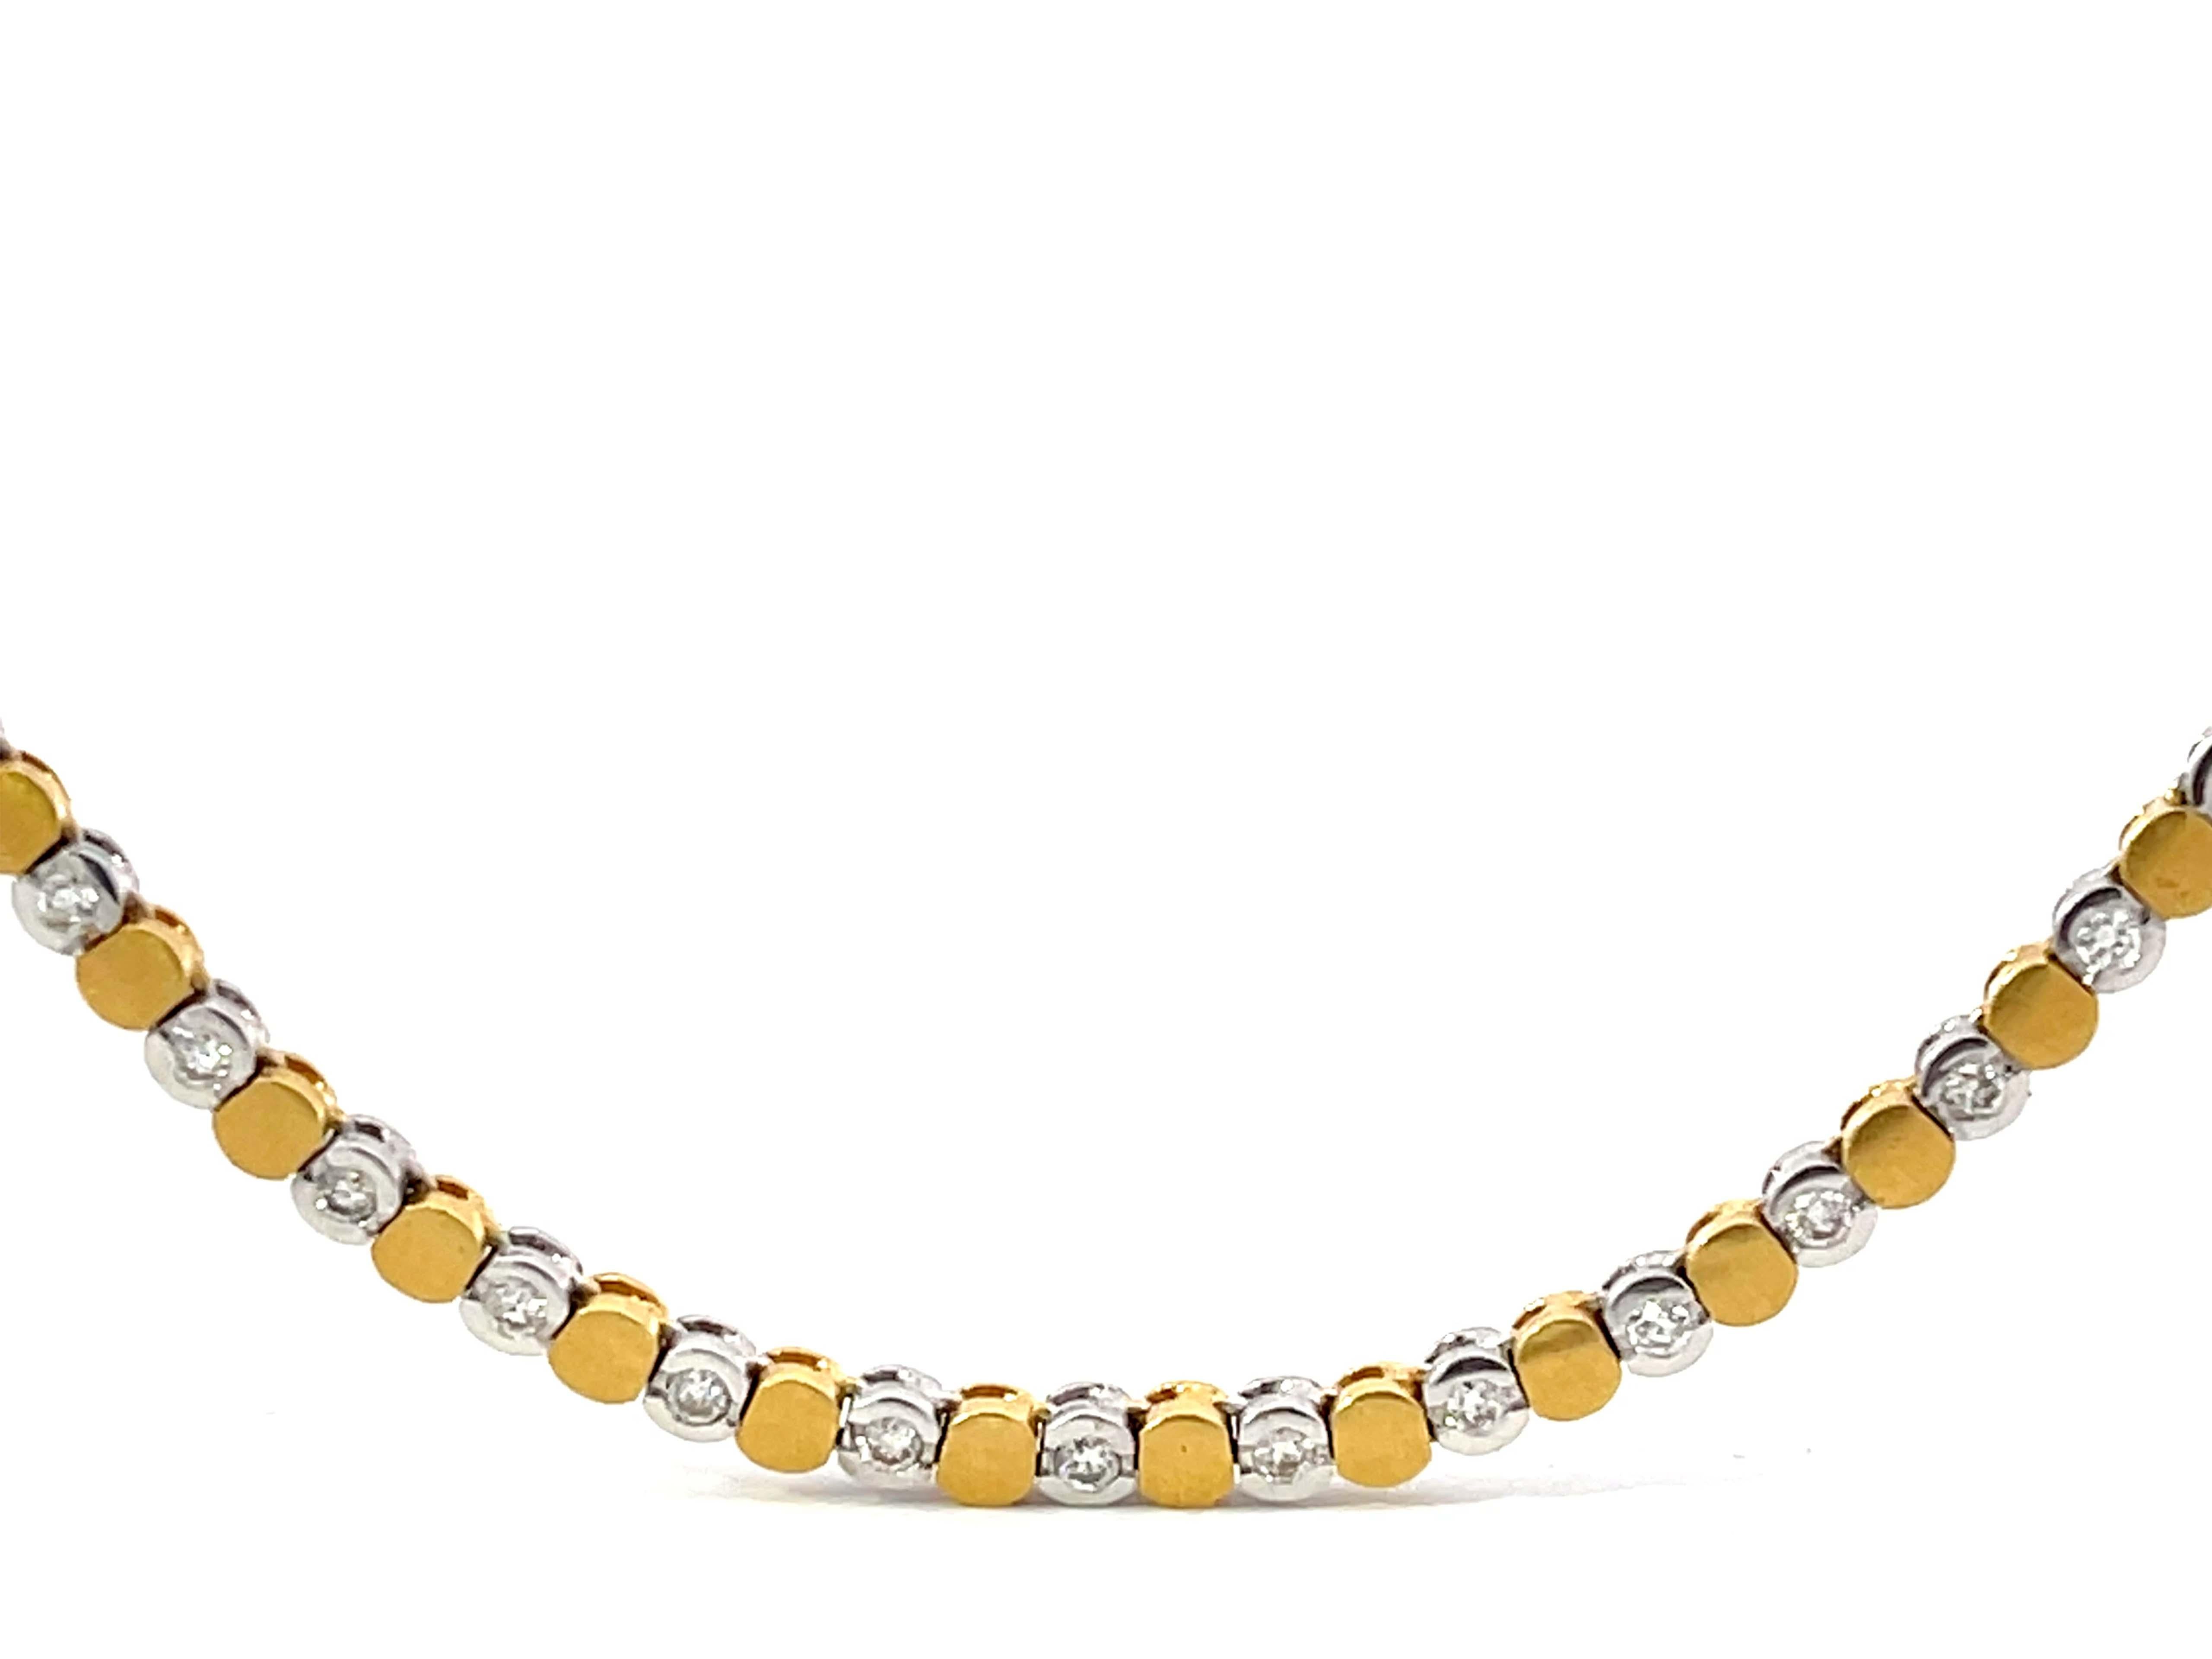 Women's Solid 18K Gold Diamond Chain For Sale